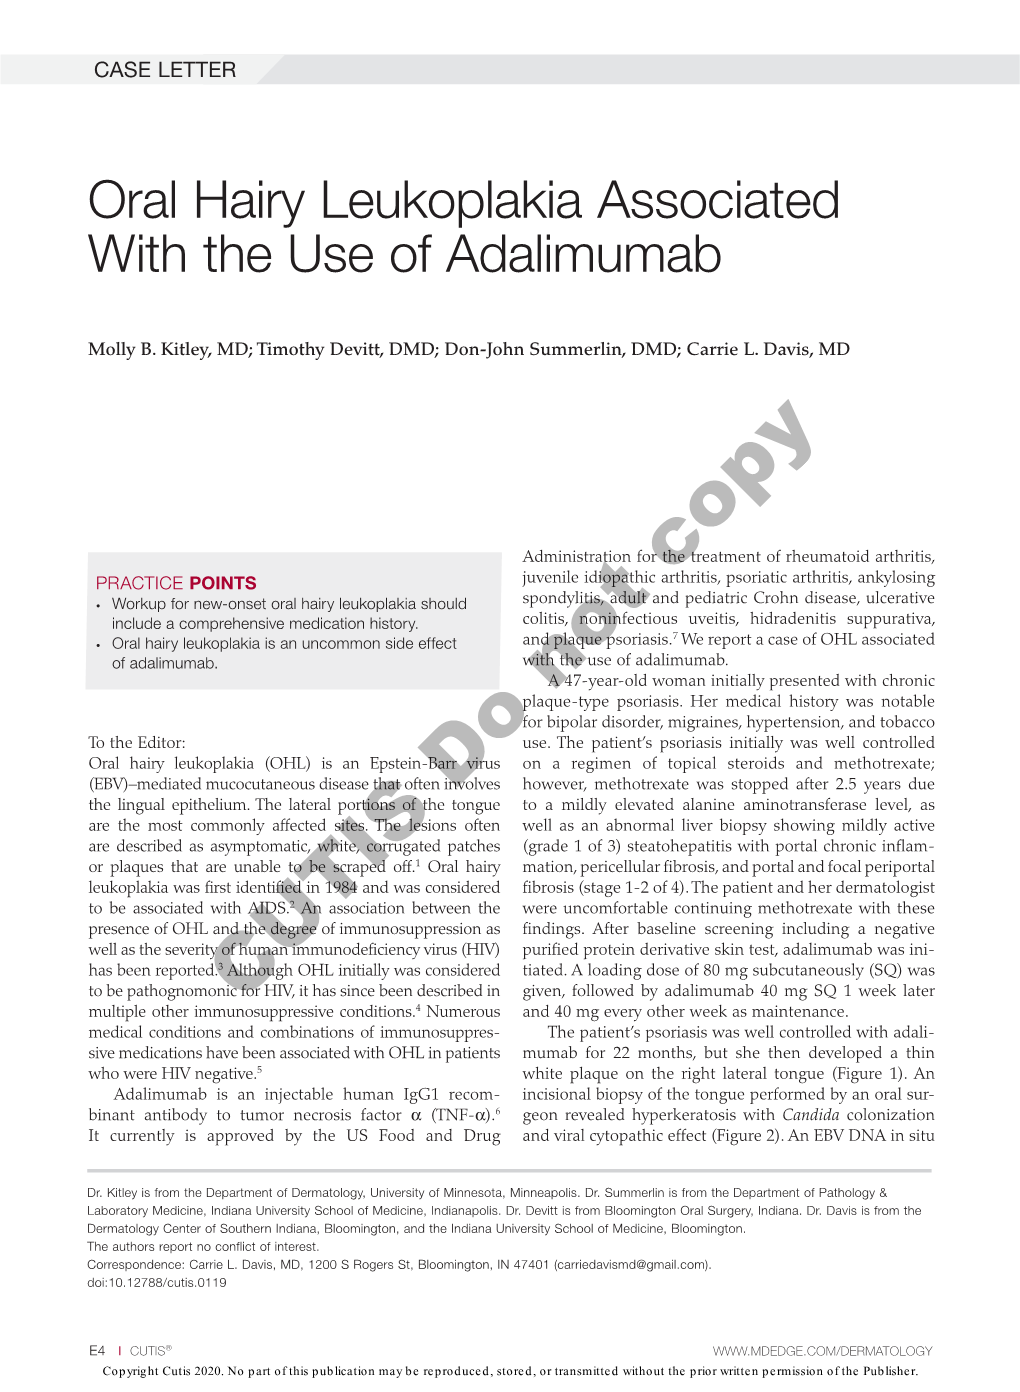 Oral Hairy Leukoplakia Associated with the Use of Adalimumab